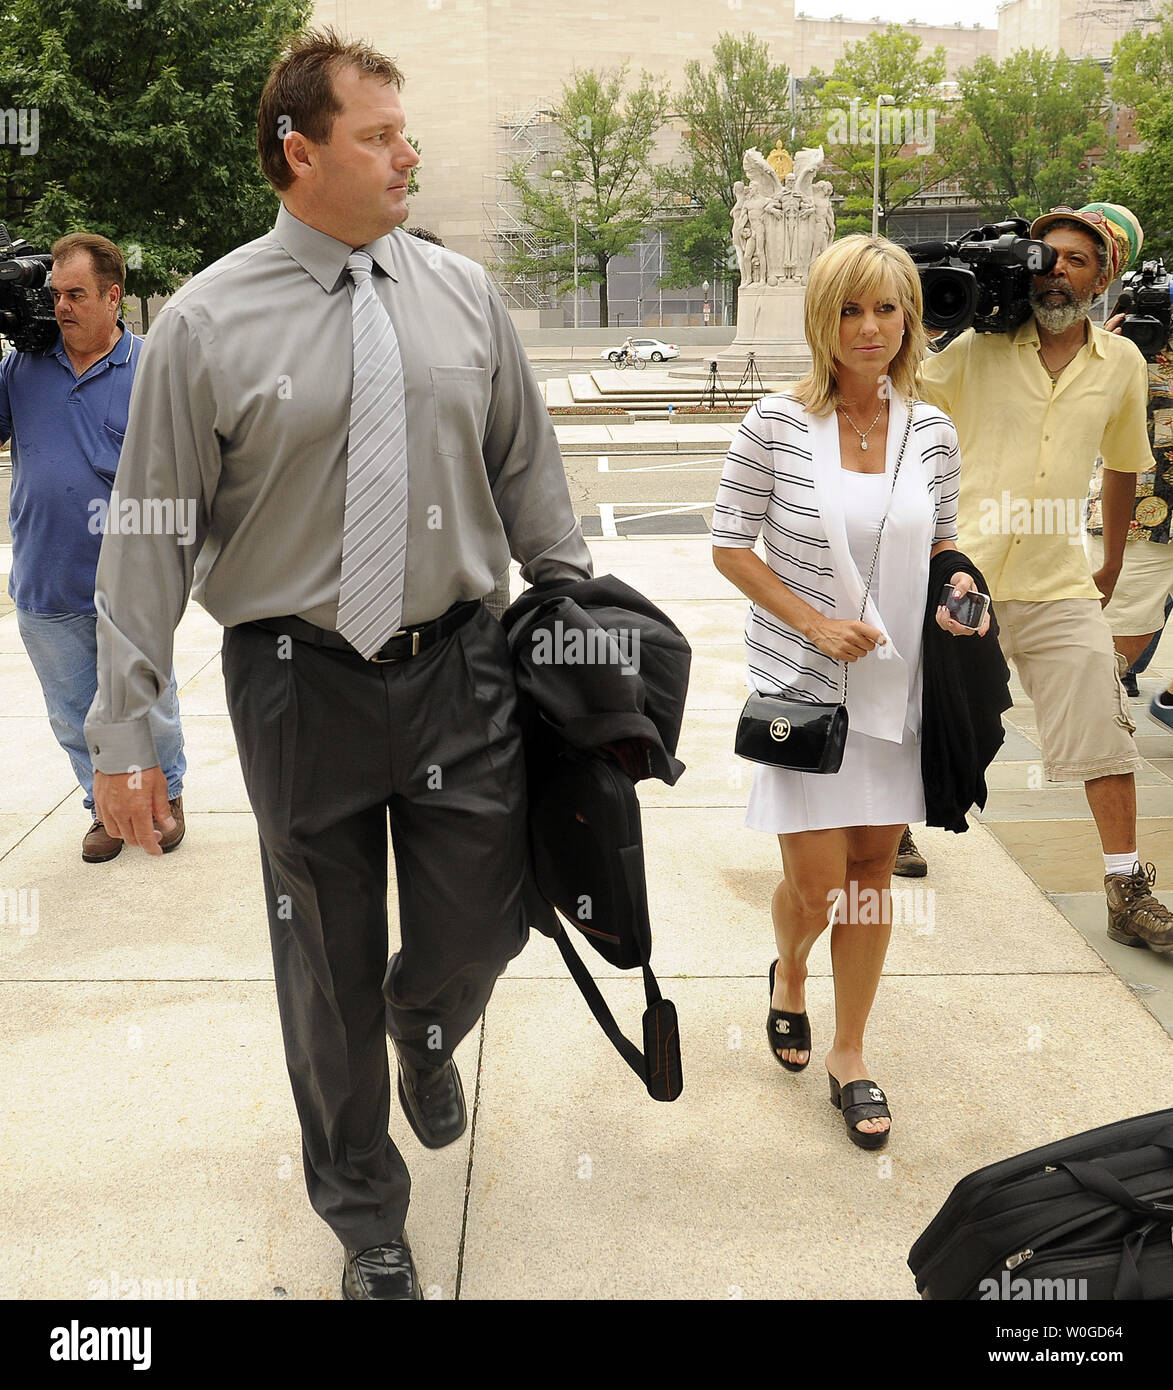 Former NY Yankees Pitcher Roger Clemens arrives with his wife Debbie at  Federal court for jury selection in his perjury trial in Washington, DC, on  July 6, 2011. Clemens is accused to